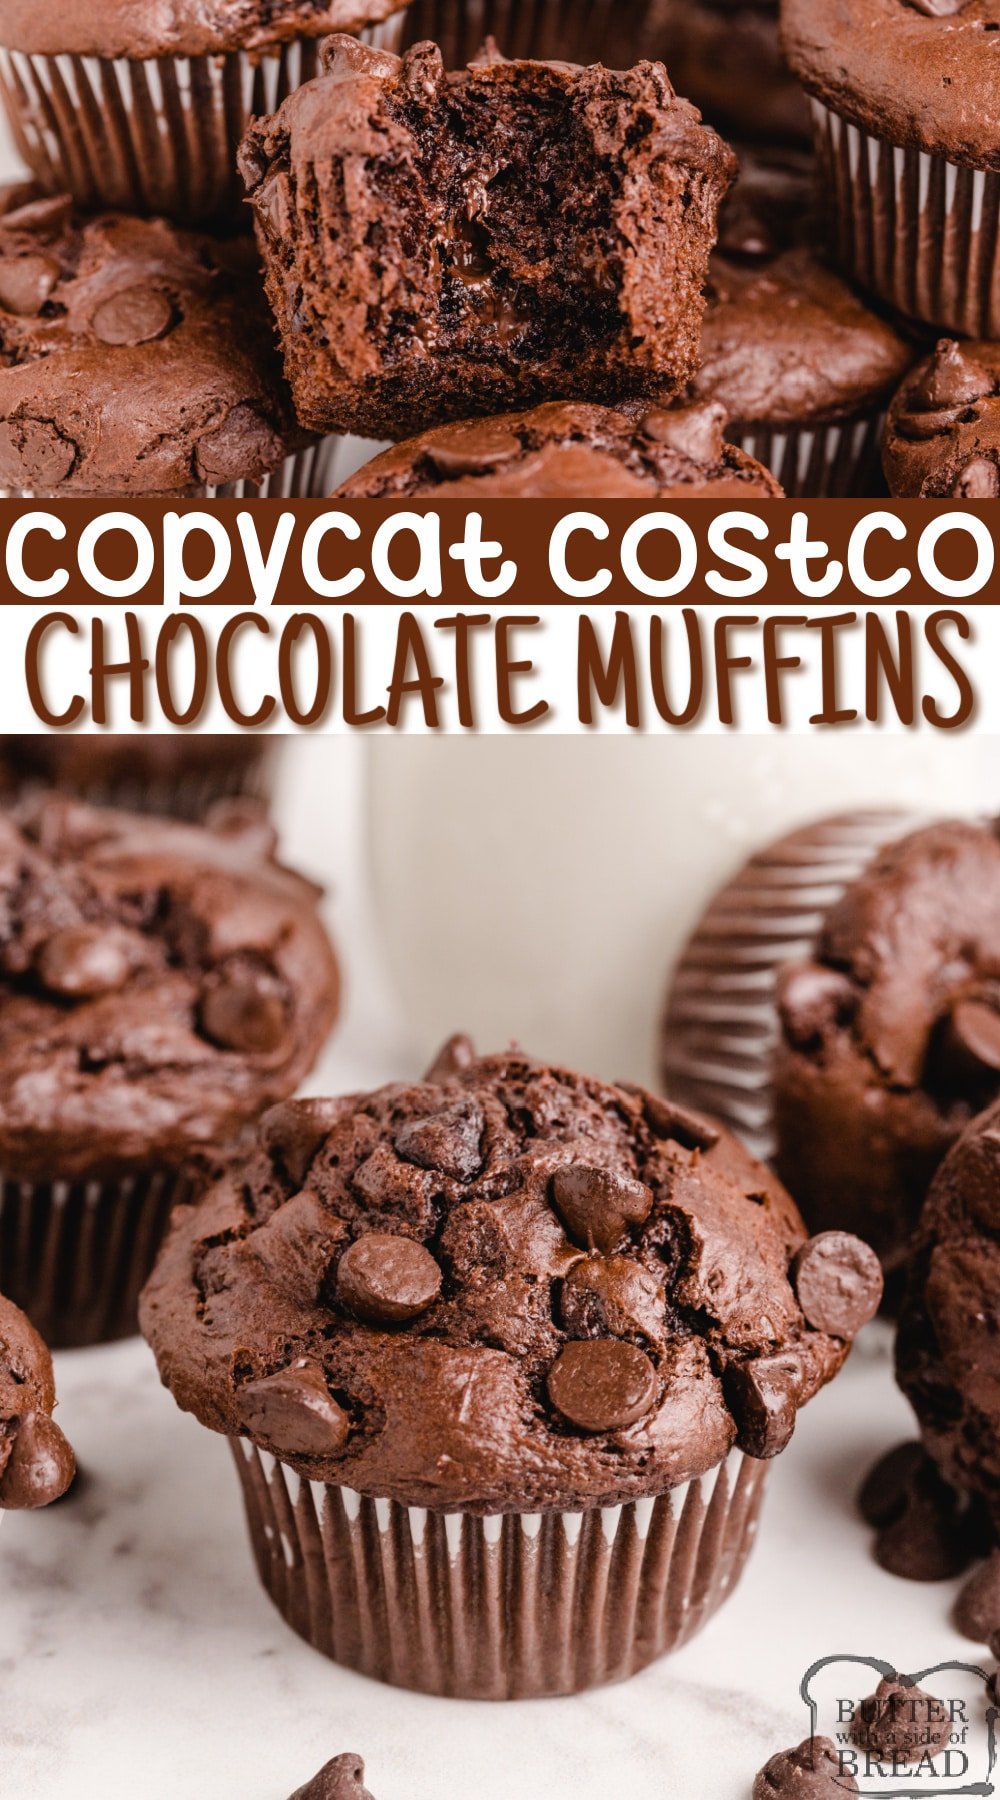 Copycat Costco Chocolate Muffins taste just like the amazing double chocolate muffins from Costco. Easy chocolate chocolate chip muffin recipe that everyone loves!